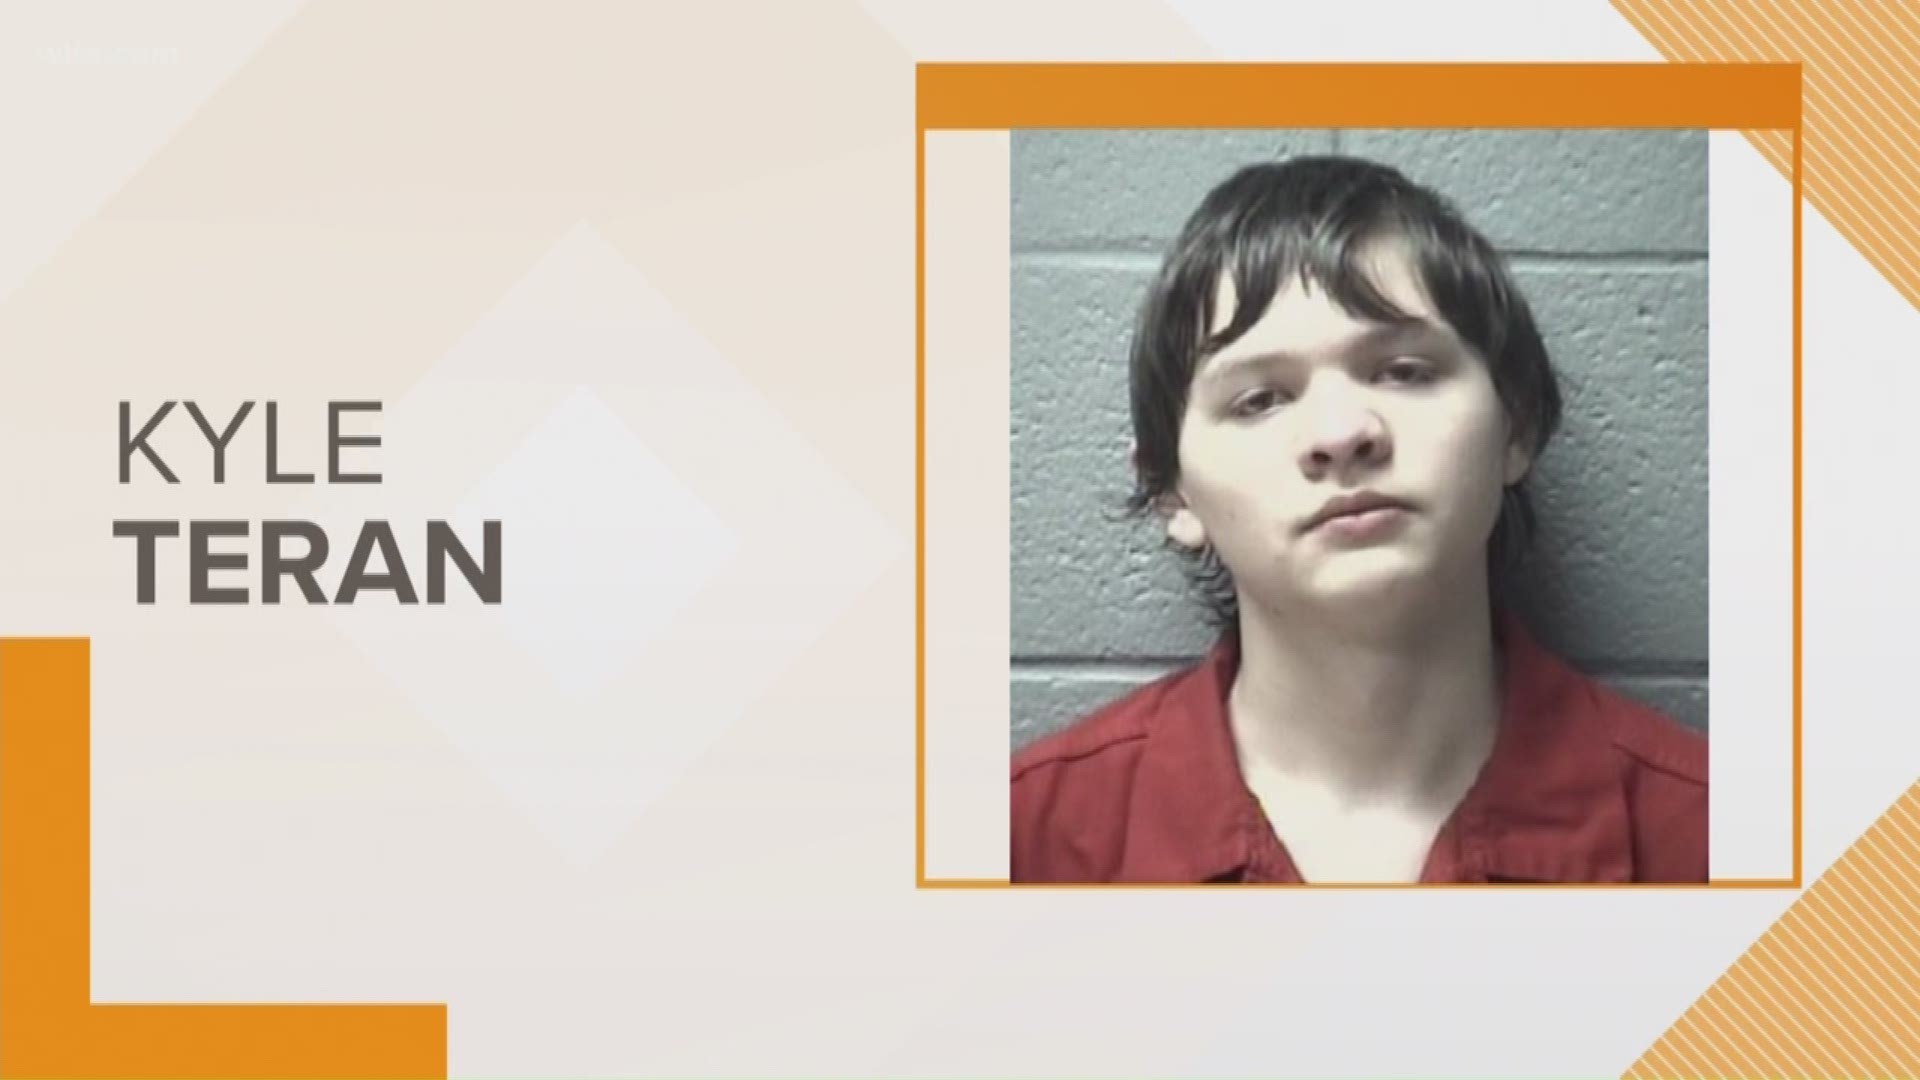 A 17-year-old in Orangeburg County has been arrested after being accused of inappropriately touching a 3-year-old girl.